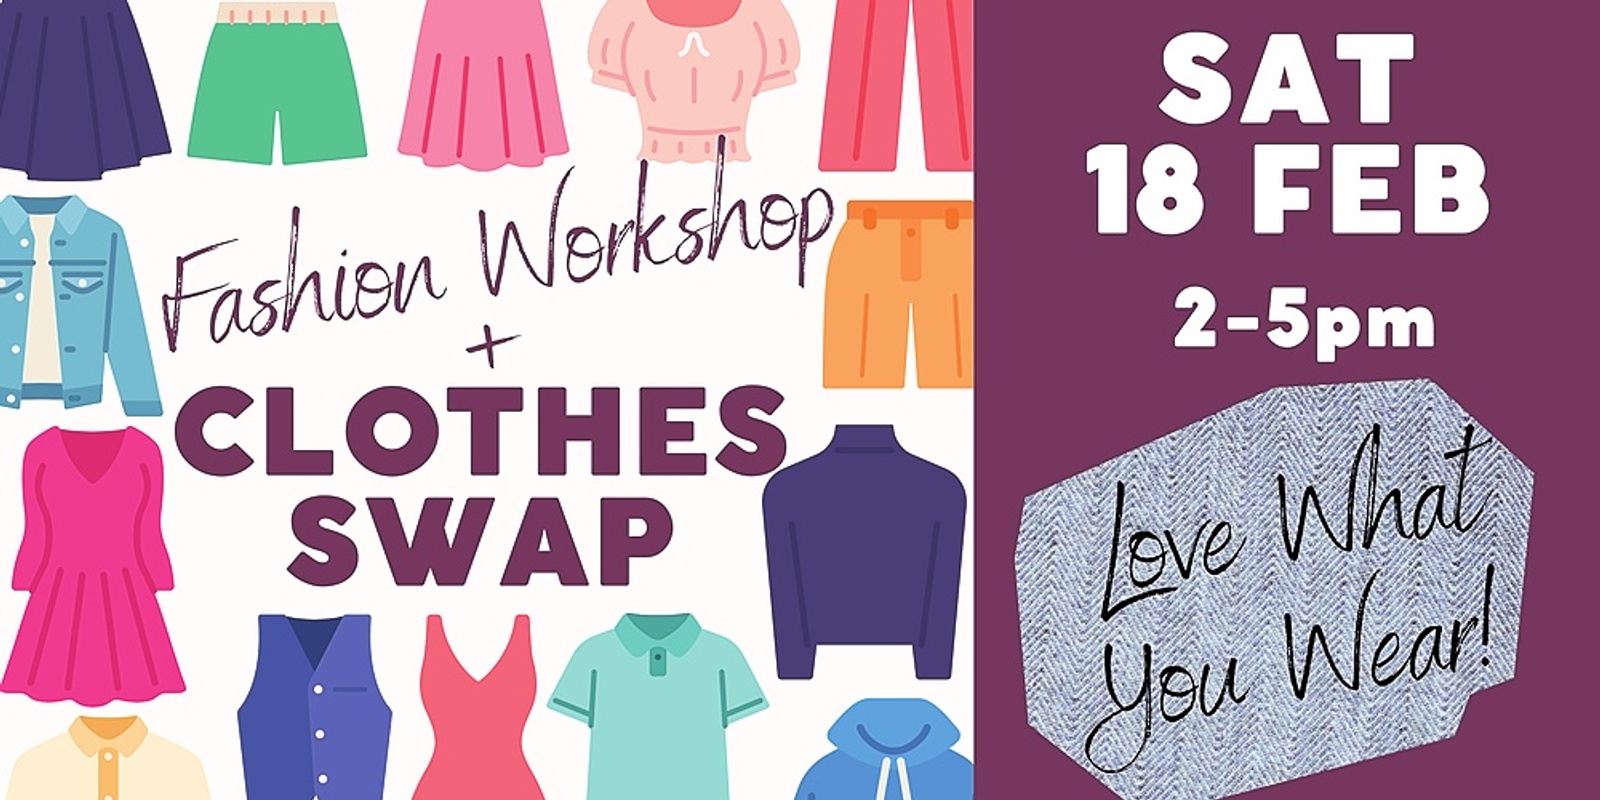 Banner image for Love What You Wear - Fashion Workshop and Clothes Swap